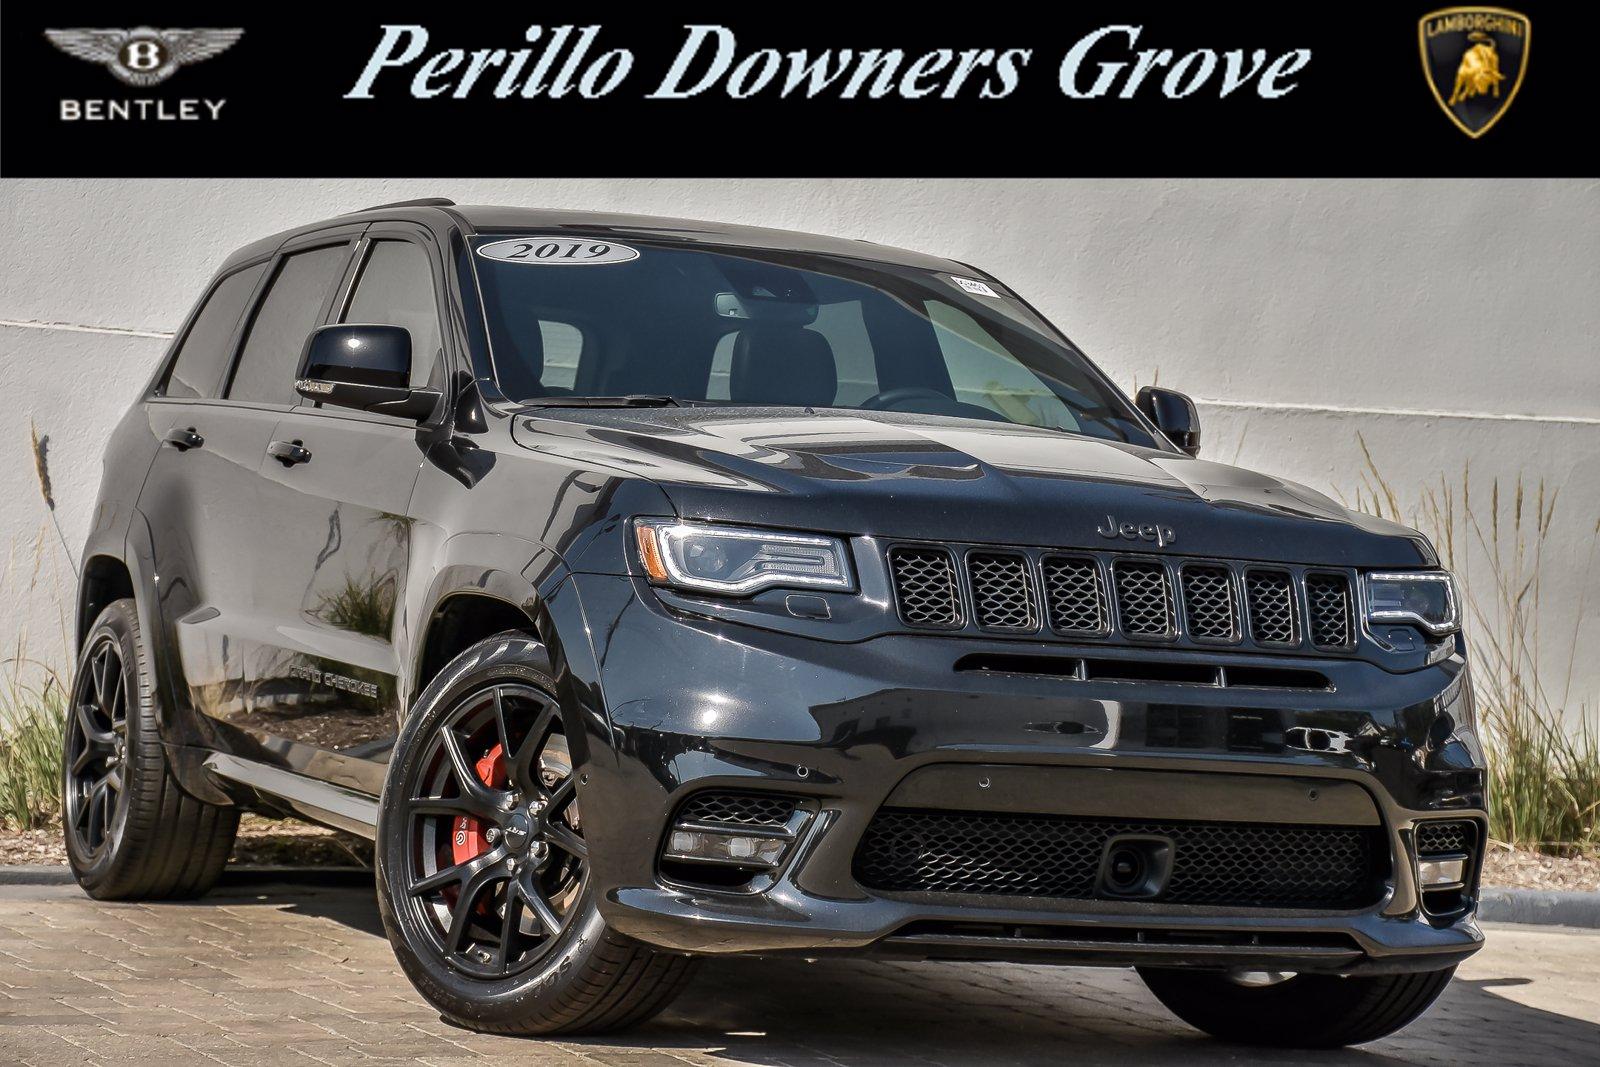 Used 2019 Jeep Grand Cherokee SRT | Downers Grove, IL